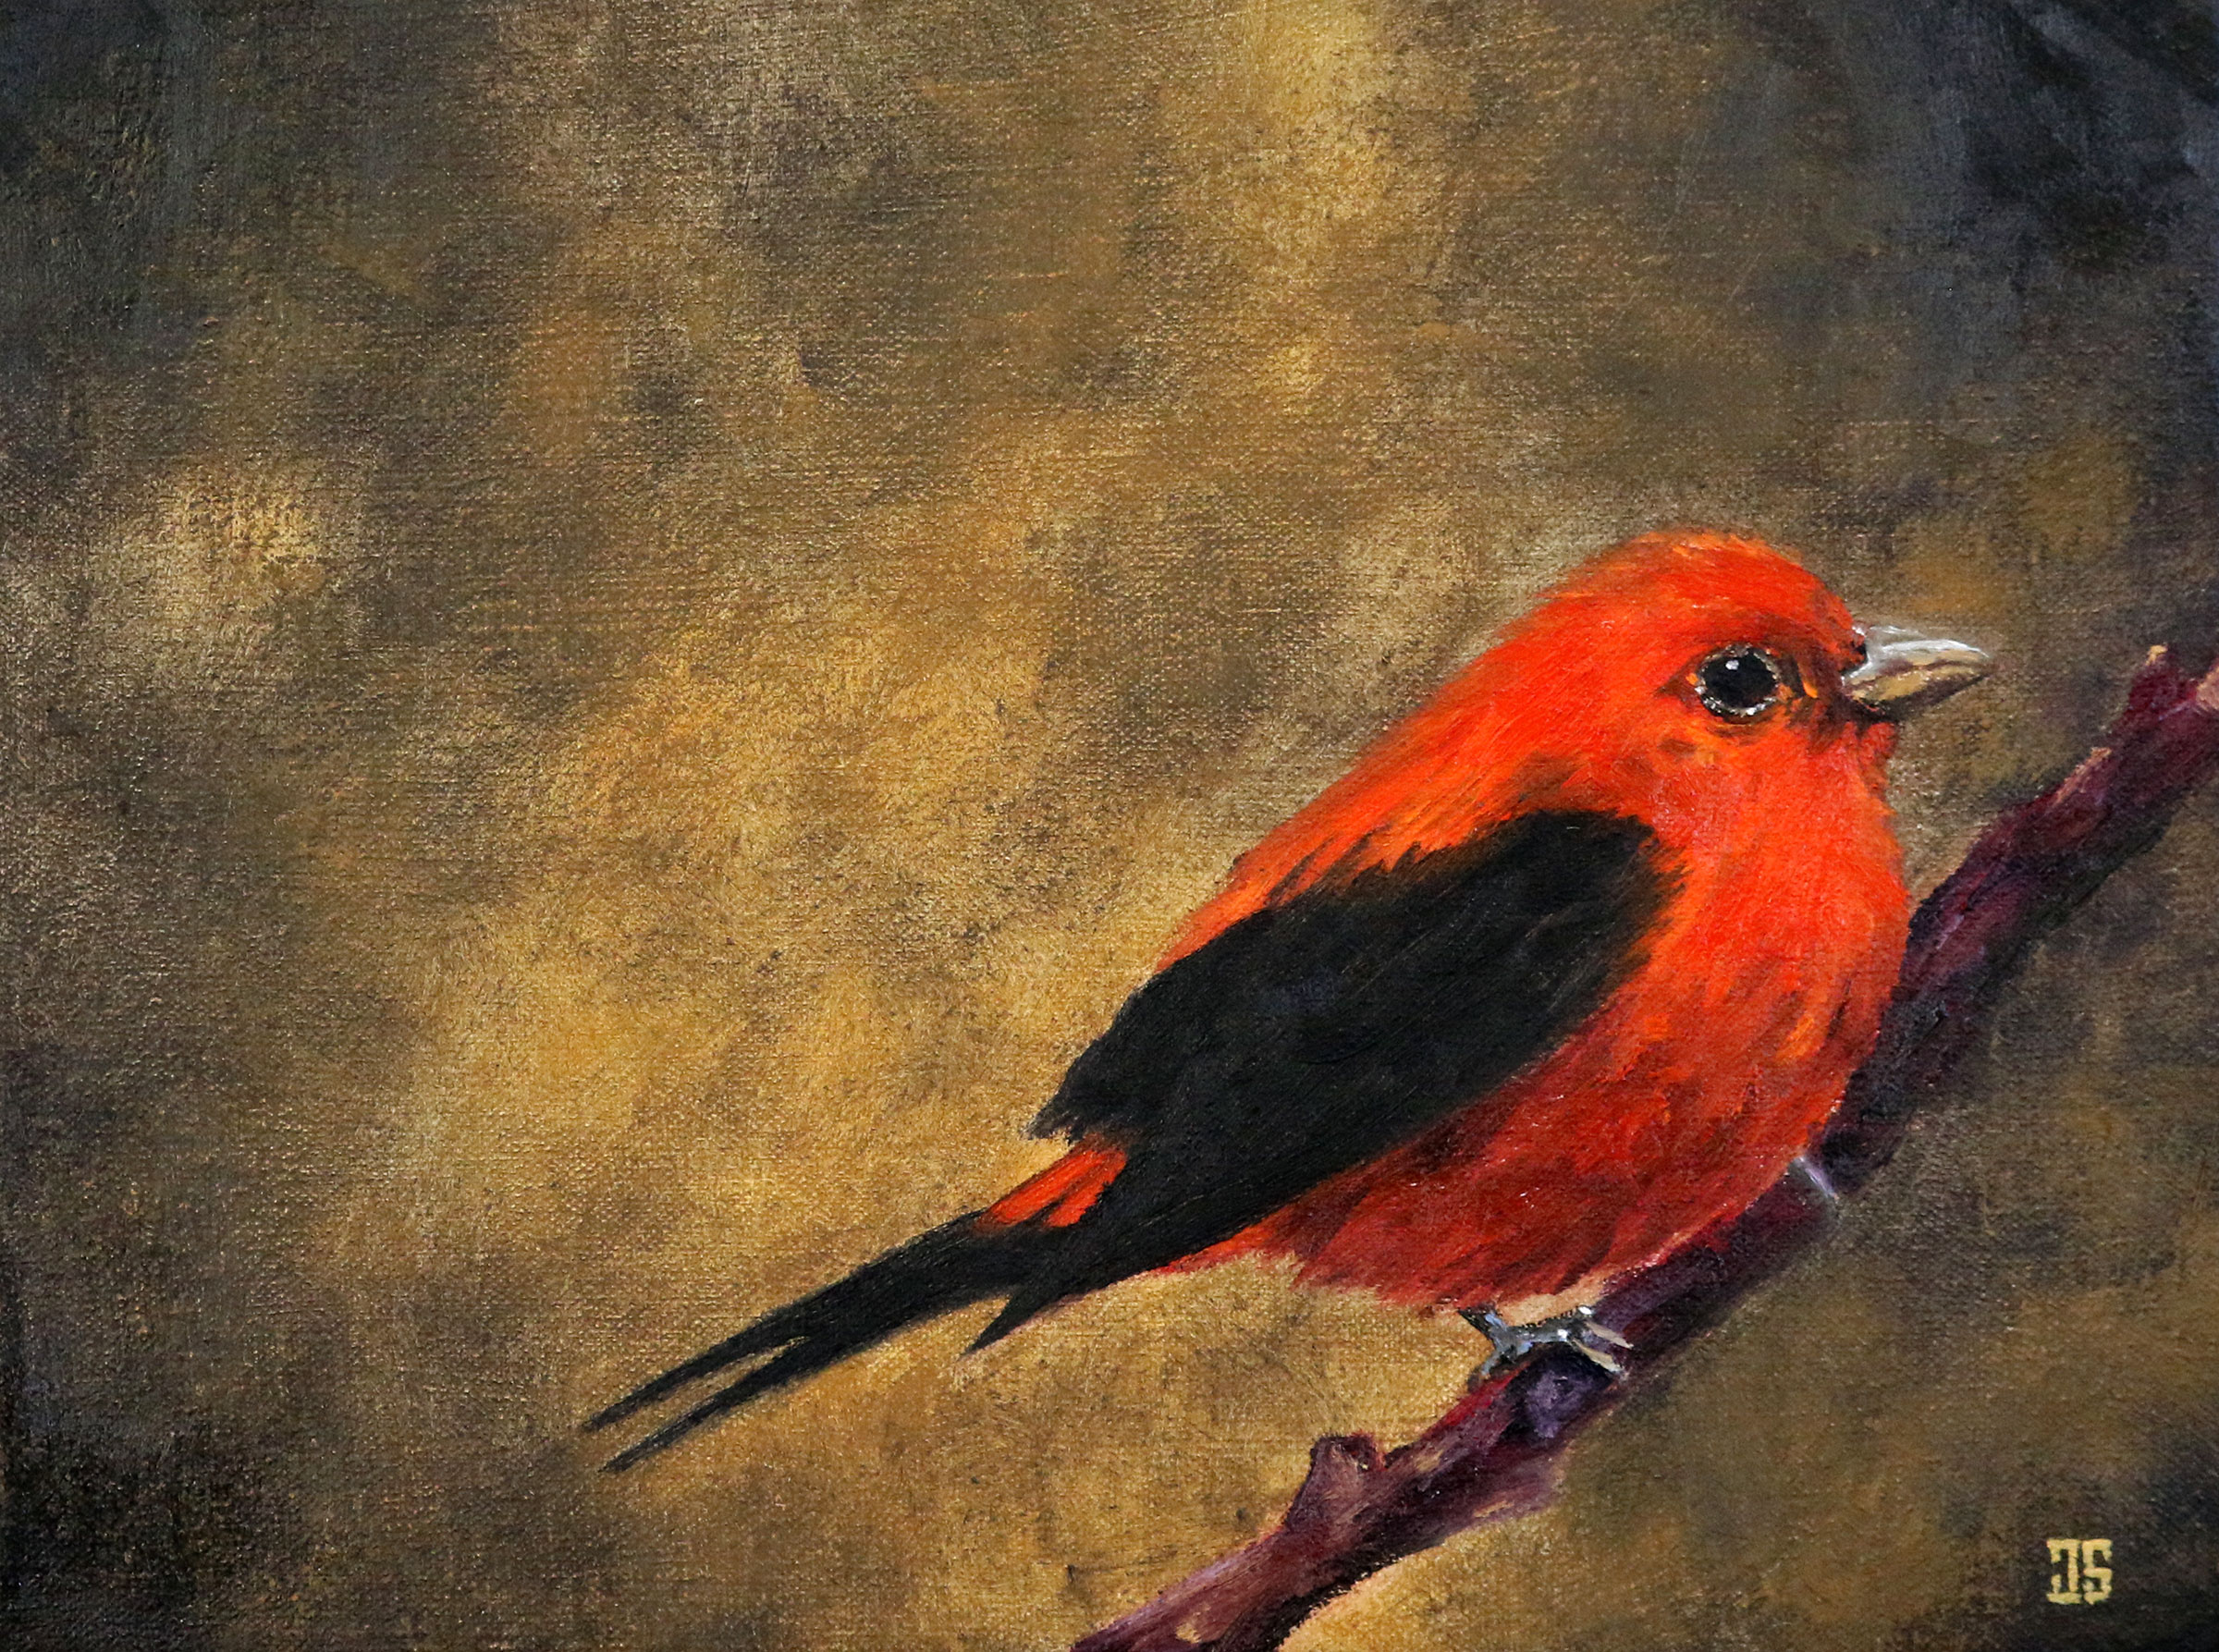 Birds of Cape Cod: Scarlet Tanager (for Geoffrey Mawby) by Jeffrey Dale Starr